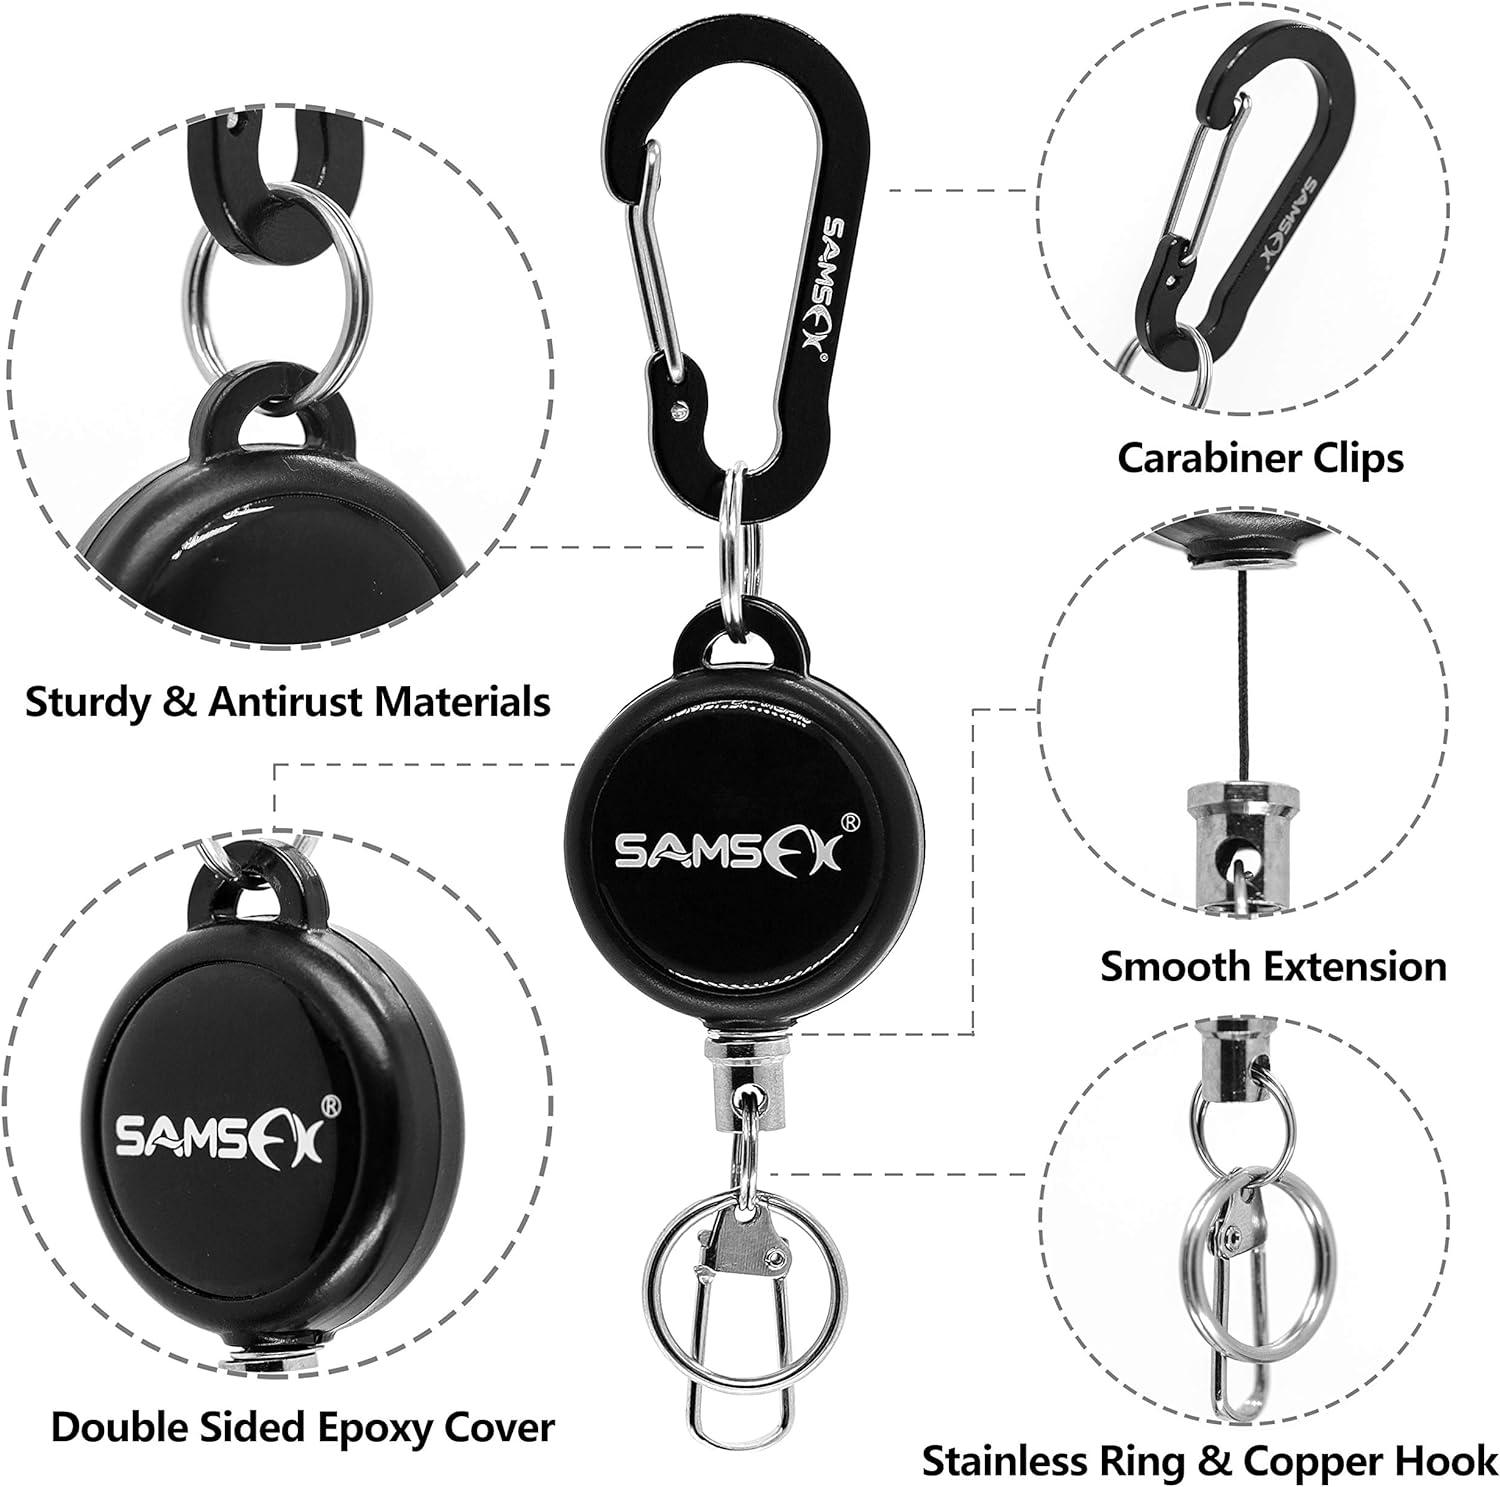 SAMSFX Fly Fishing Zinger Retractor for Anglers Vest Pack Tool